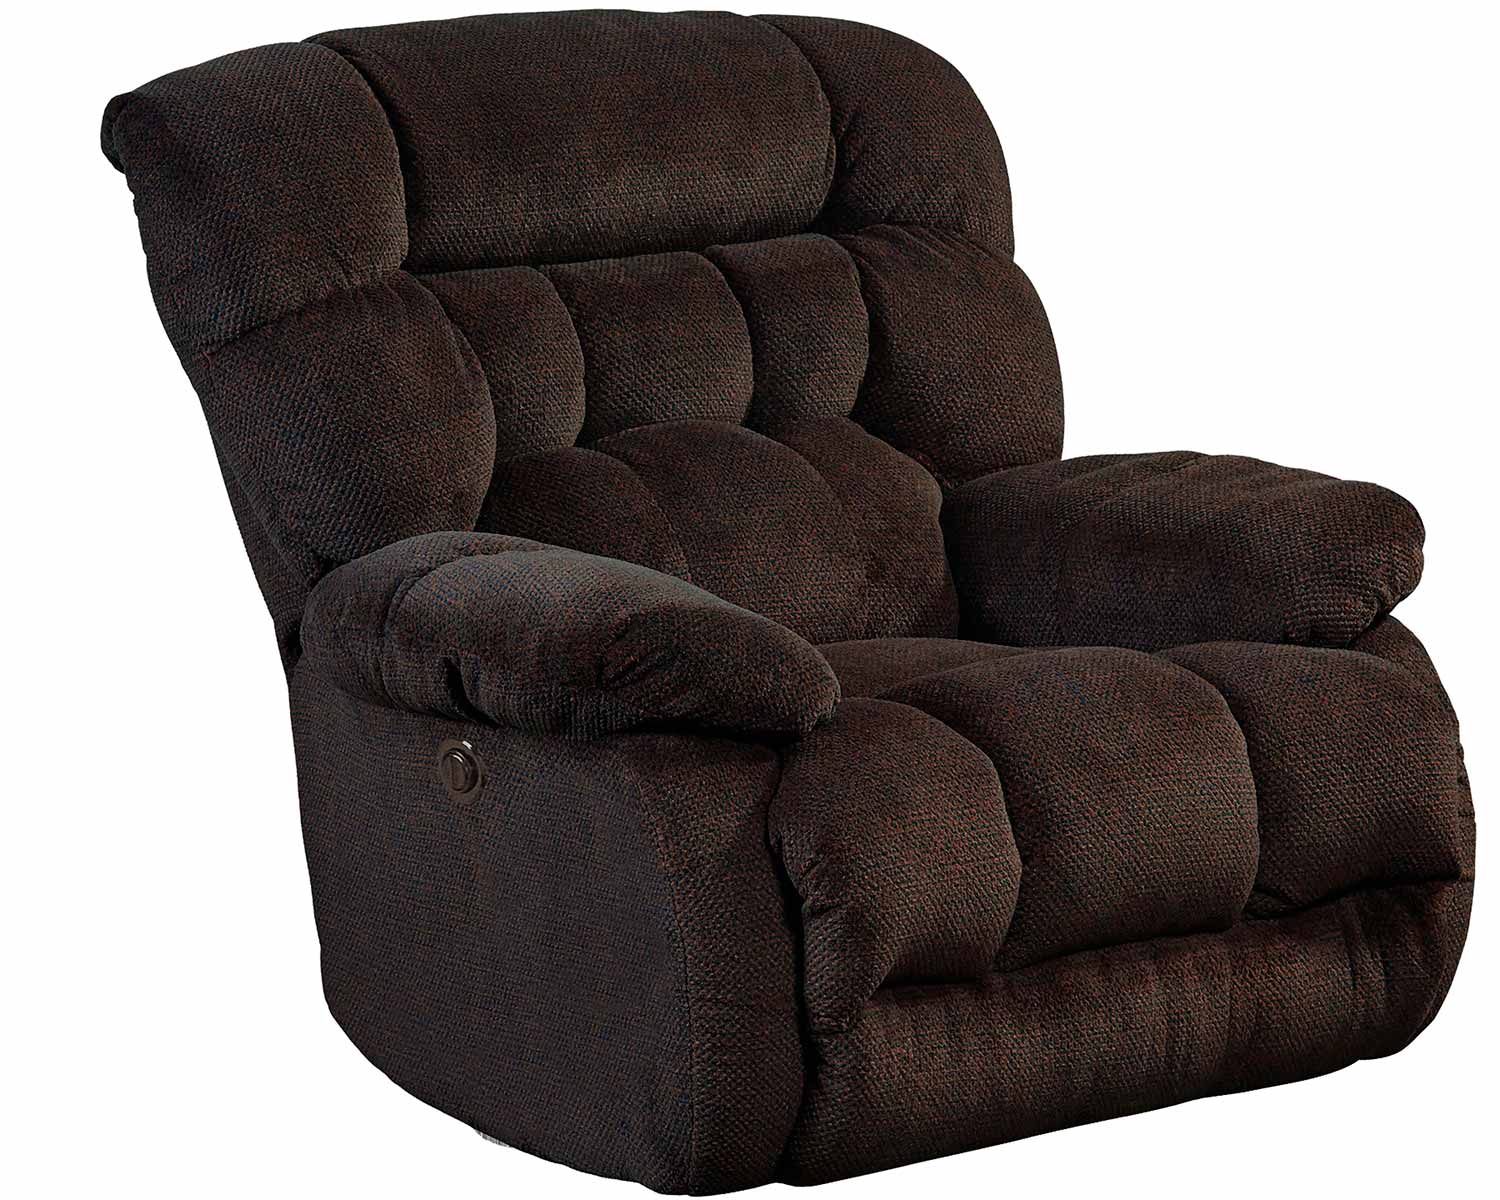 CatNapper Daly Chaise Rocker Recliner Chair - Chocolate